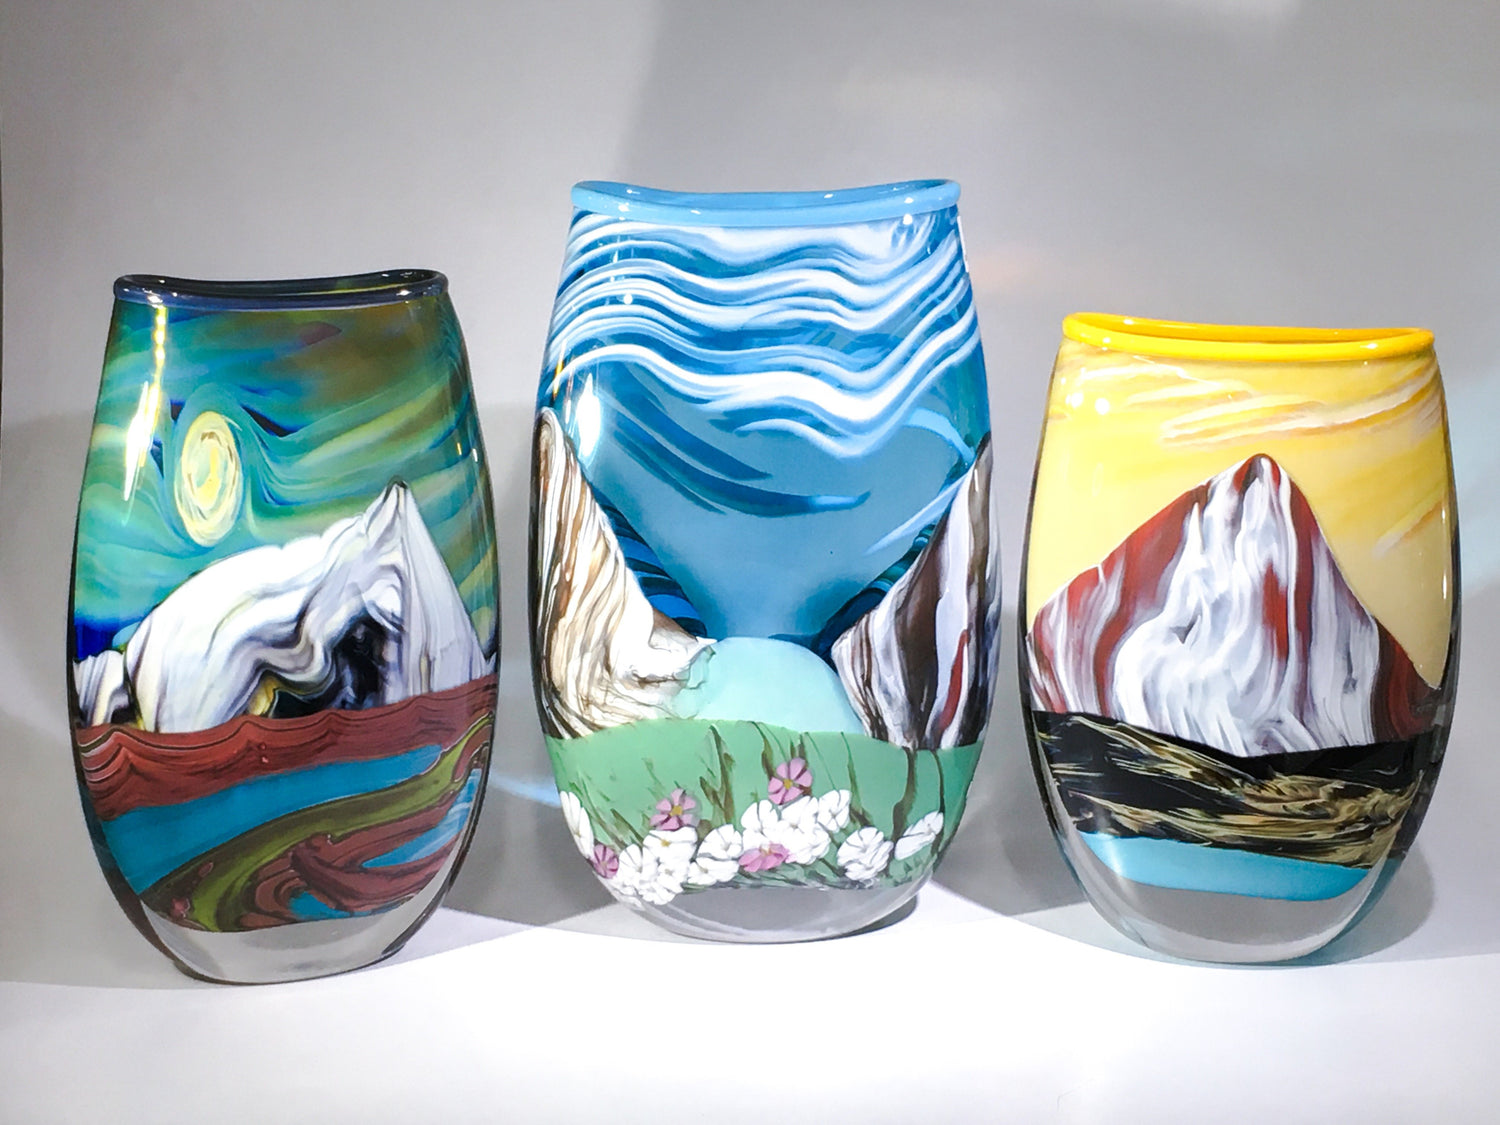 Summit Vase, hand made blown glass vase with mountain imagery of coloured glass embedded in the piece.